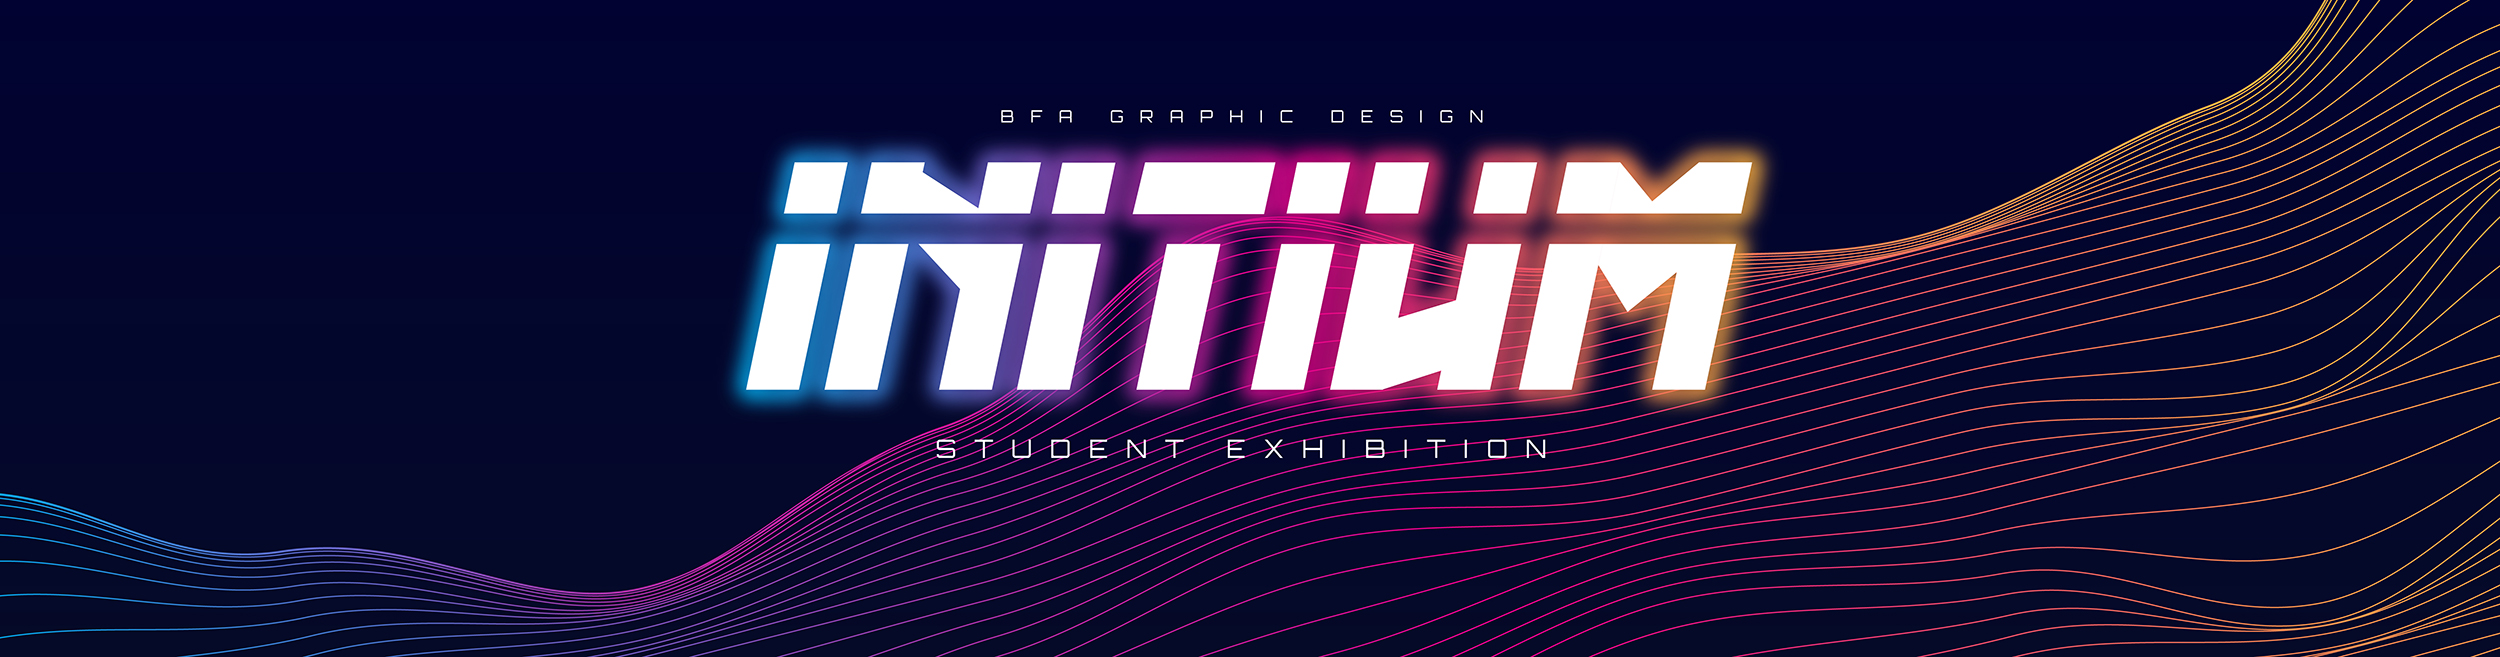 Fall 2020 Student Exhibition Banner Page Banner 